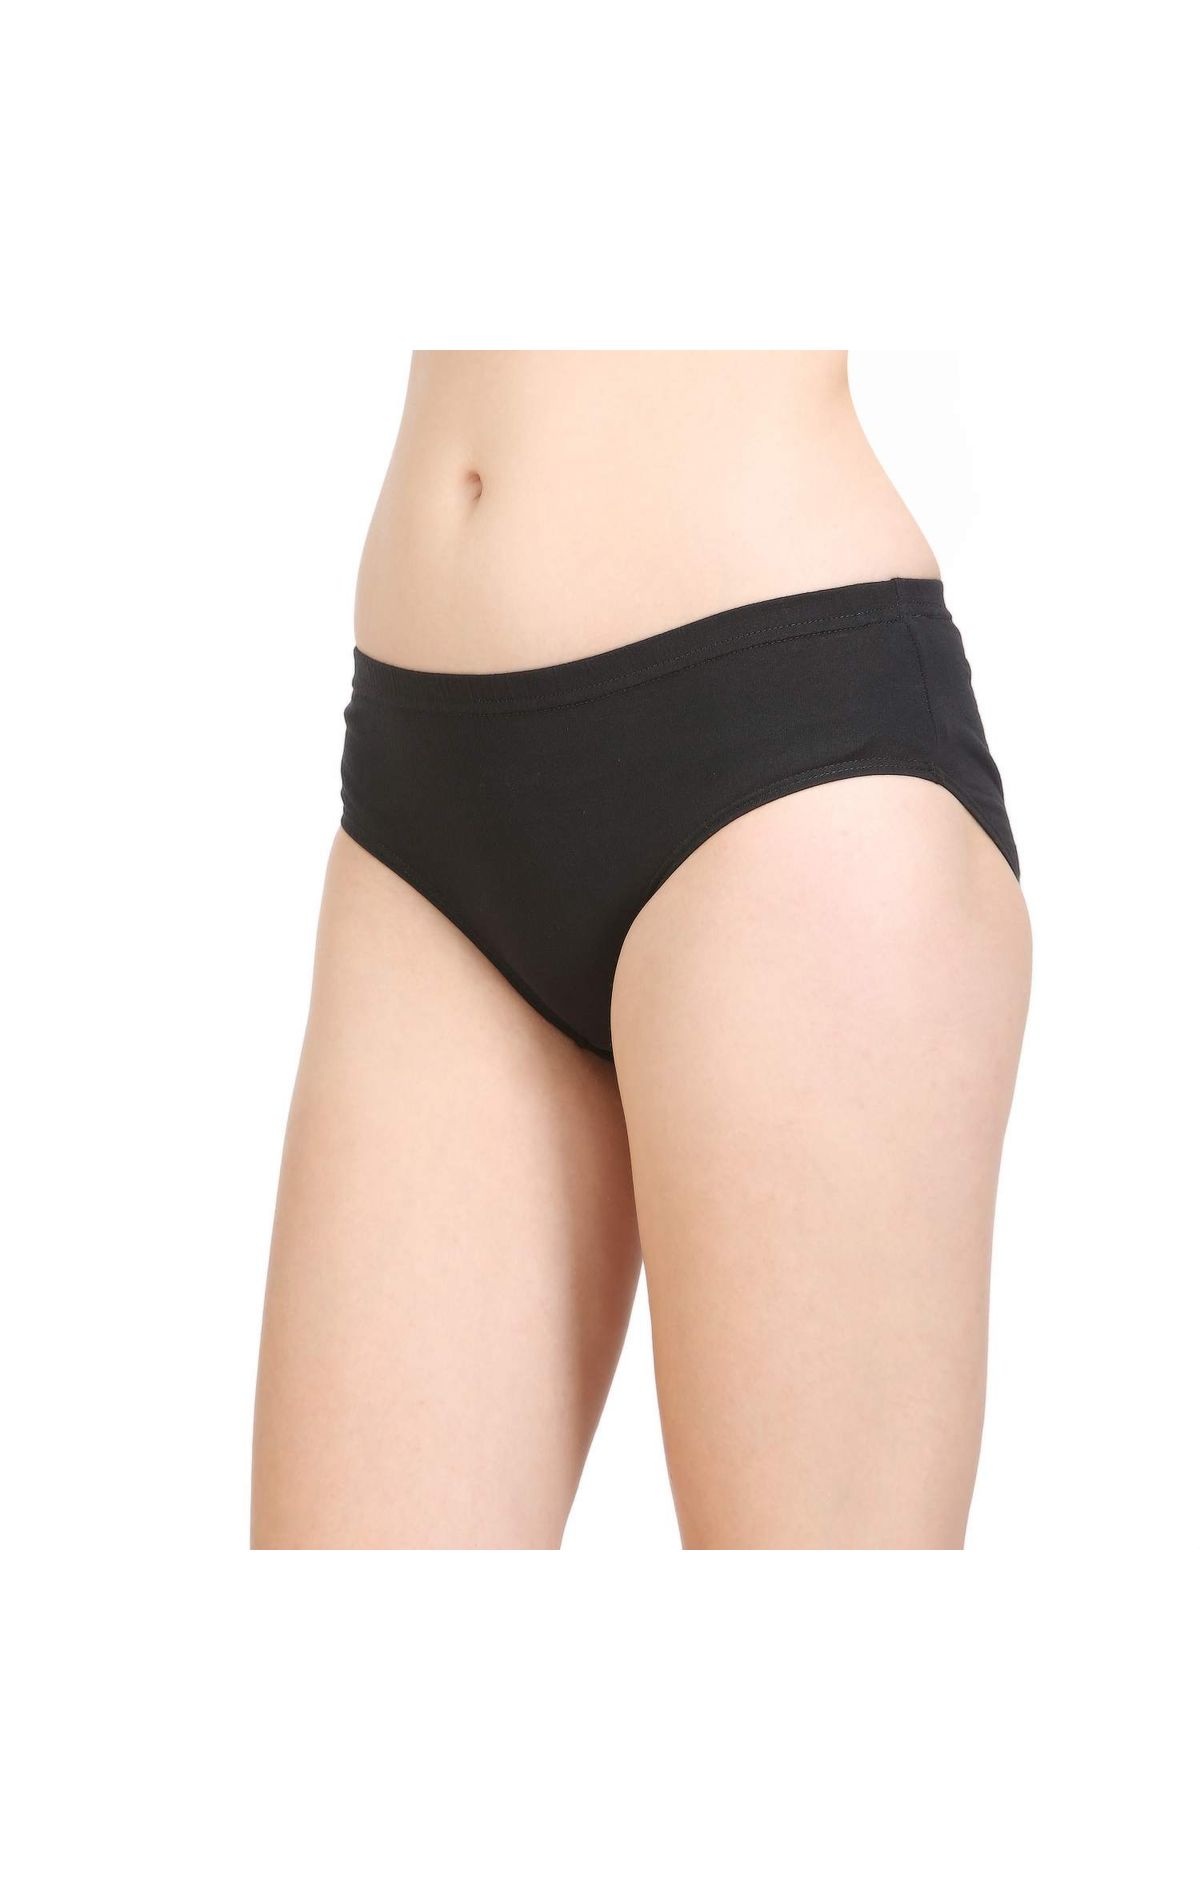 Bodycare 100 Cotton Classic Panties In Assorted Colors, 2c